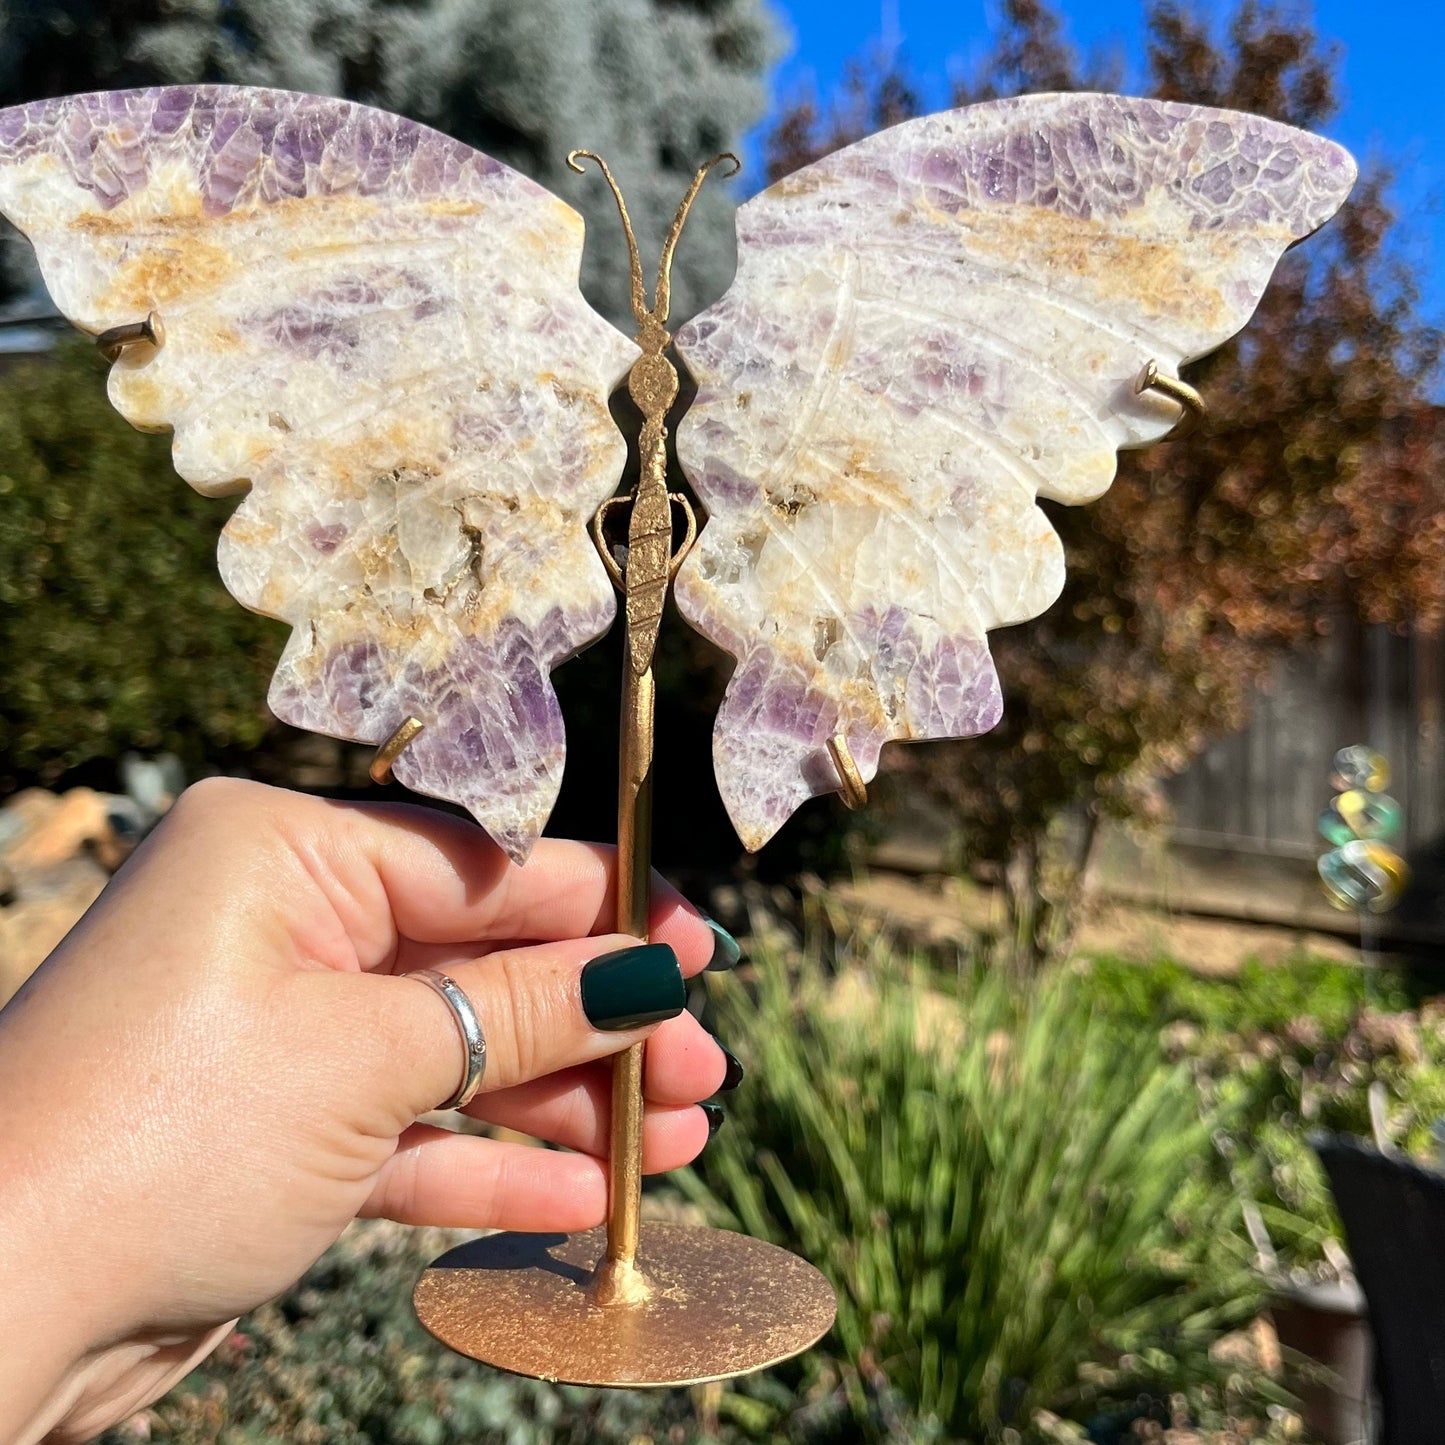 Dream Amethyst Butterfly | Amethyst Crystal Butterfly Wings | Chevron Amethyst Butterfly Crystal | Butterfly Wings Stone Carving